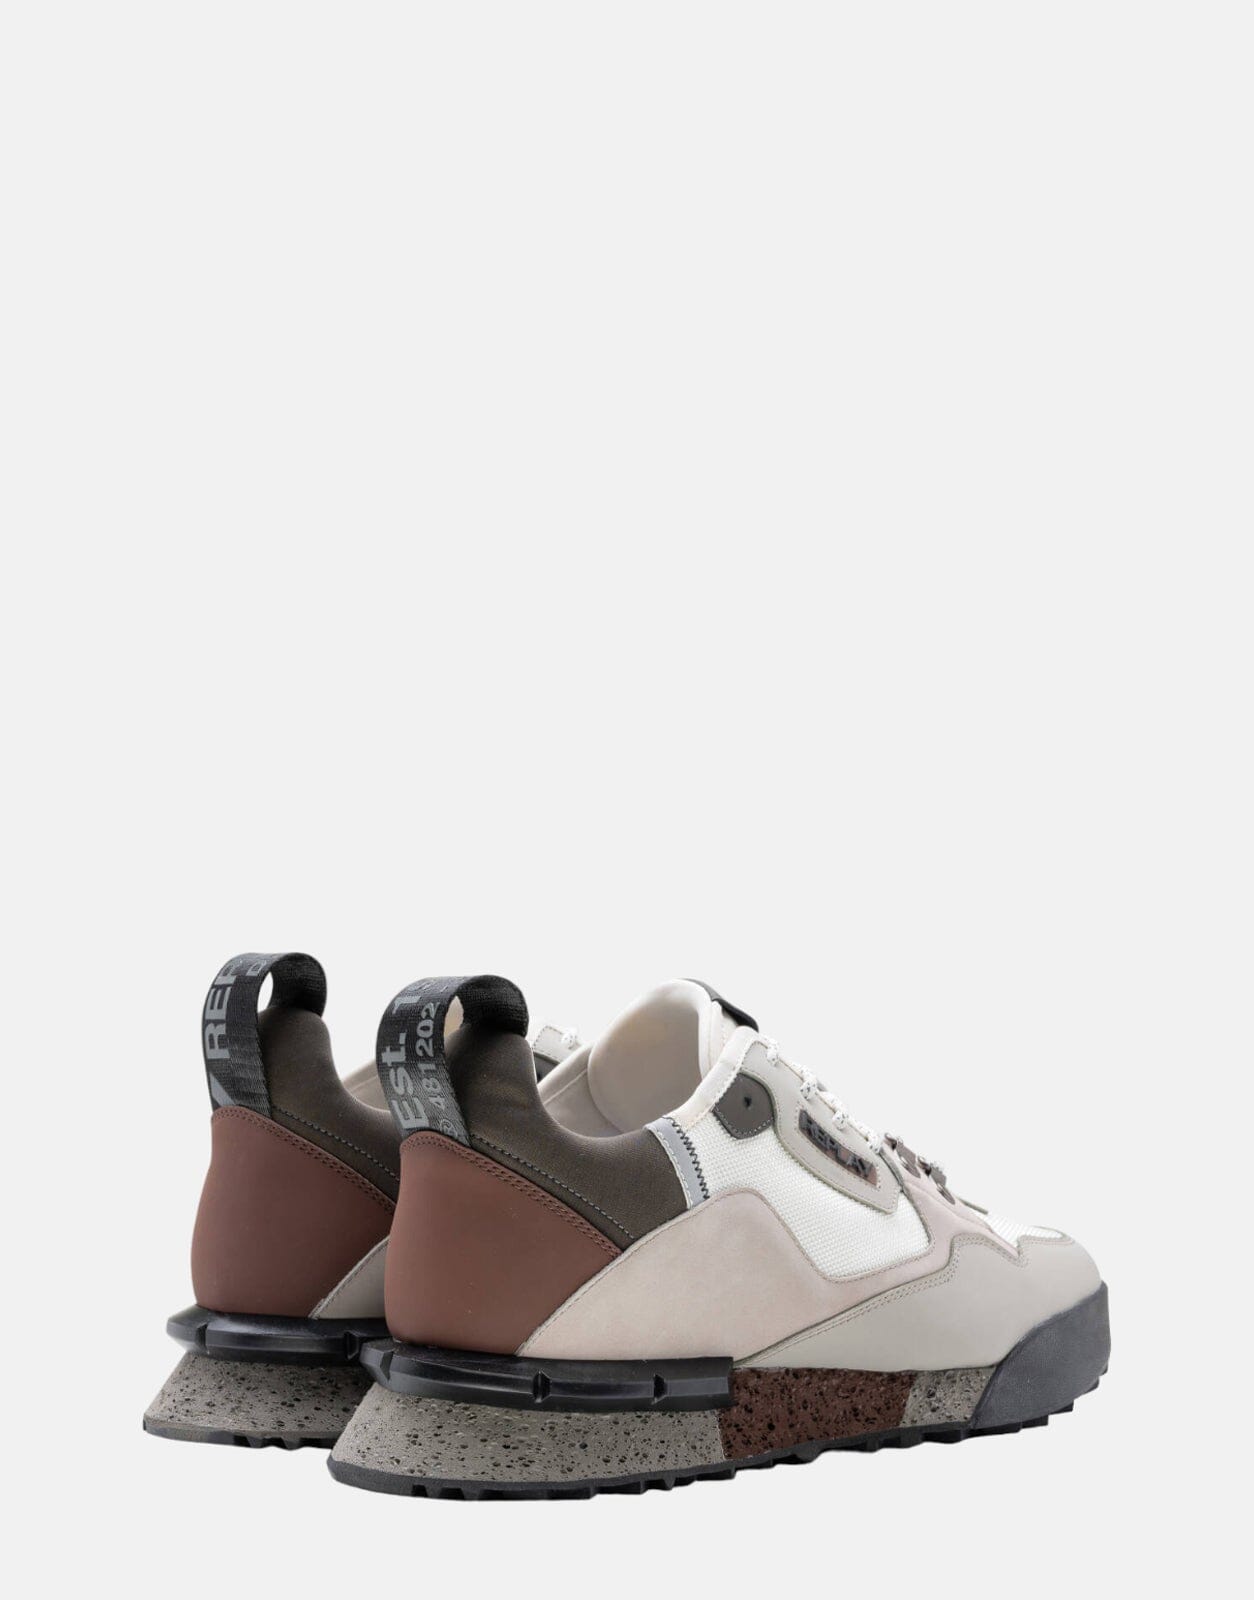 Replay Mens Field Speed Shoes Tofu